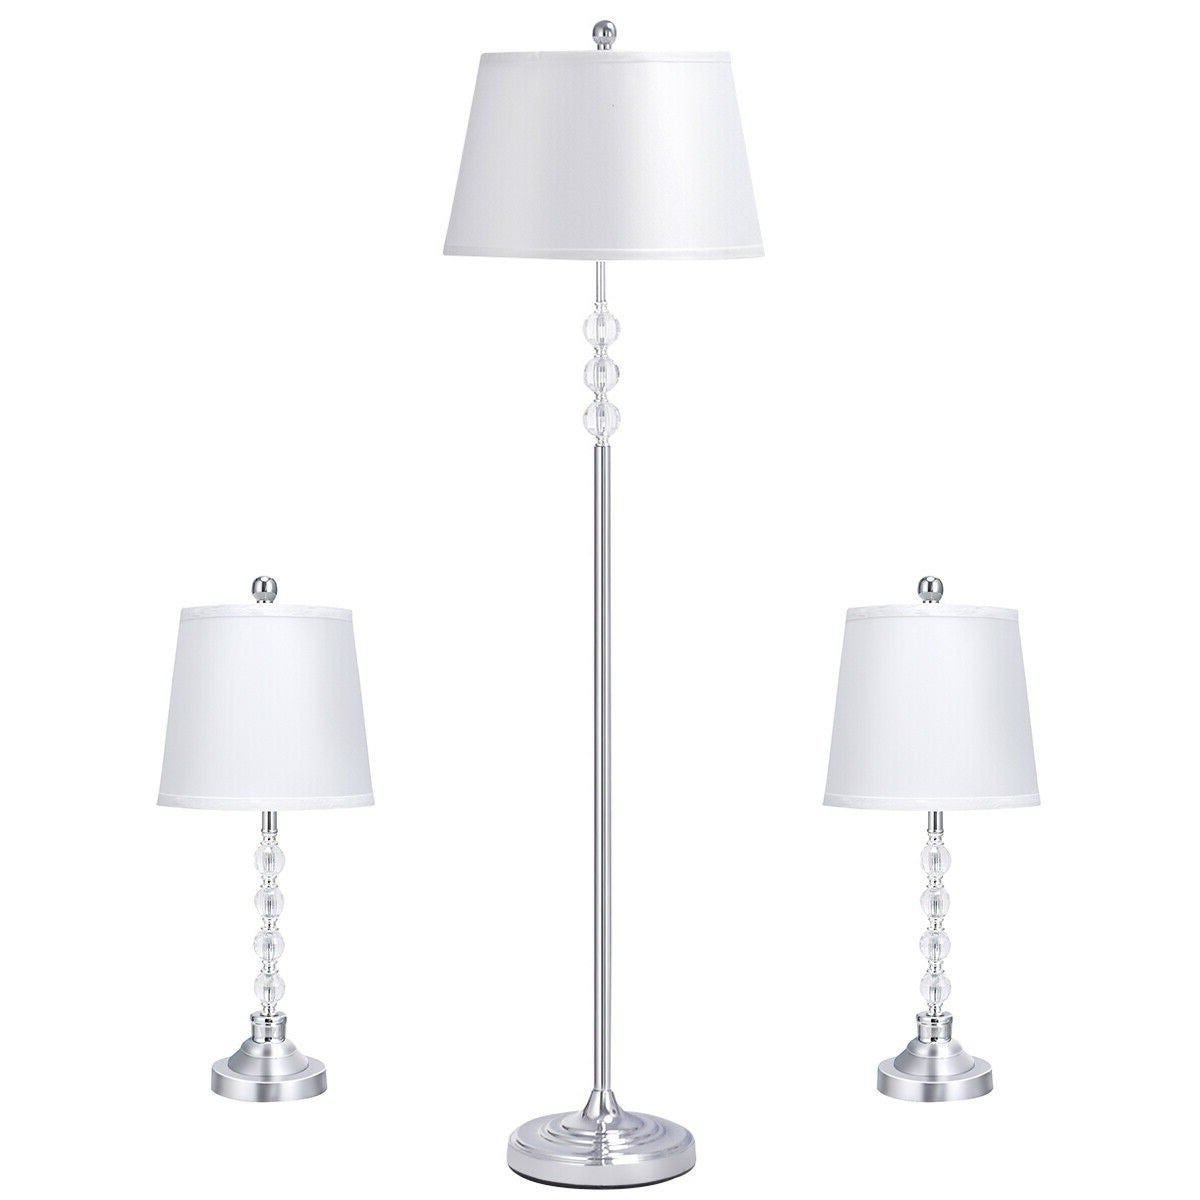 3 Piece Set Standing Lamps In Newest 3 Piece Floor Lamp And Table Lamps Set – Floor Lamp: 15" X  (View 6 of 10)